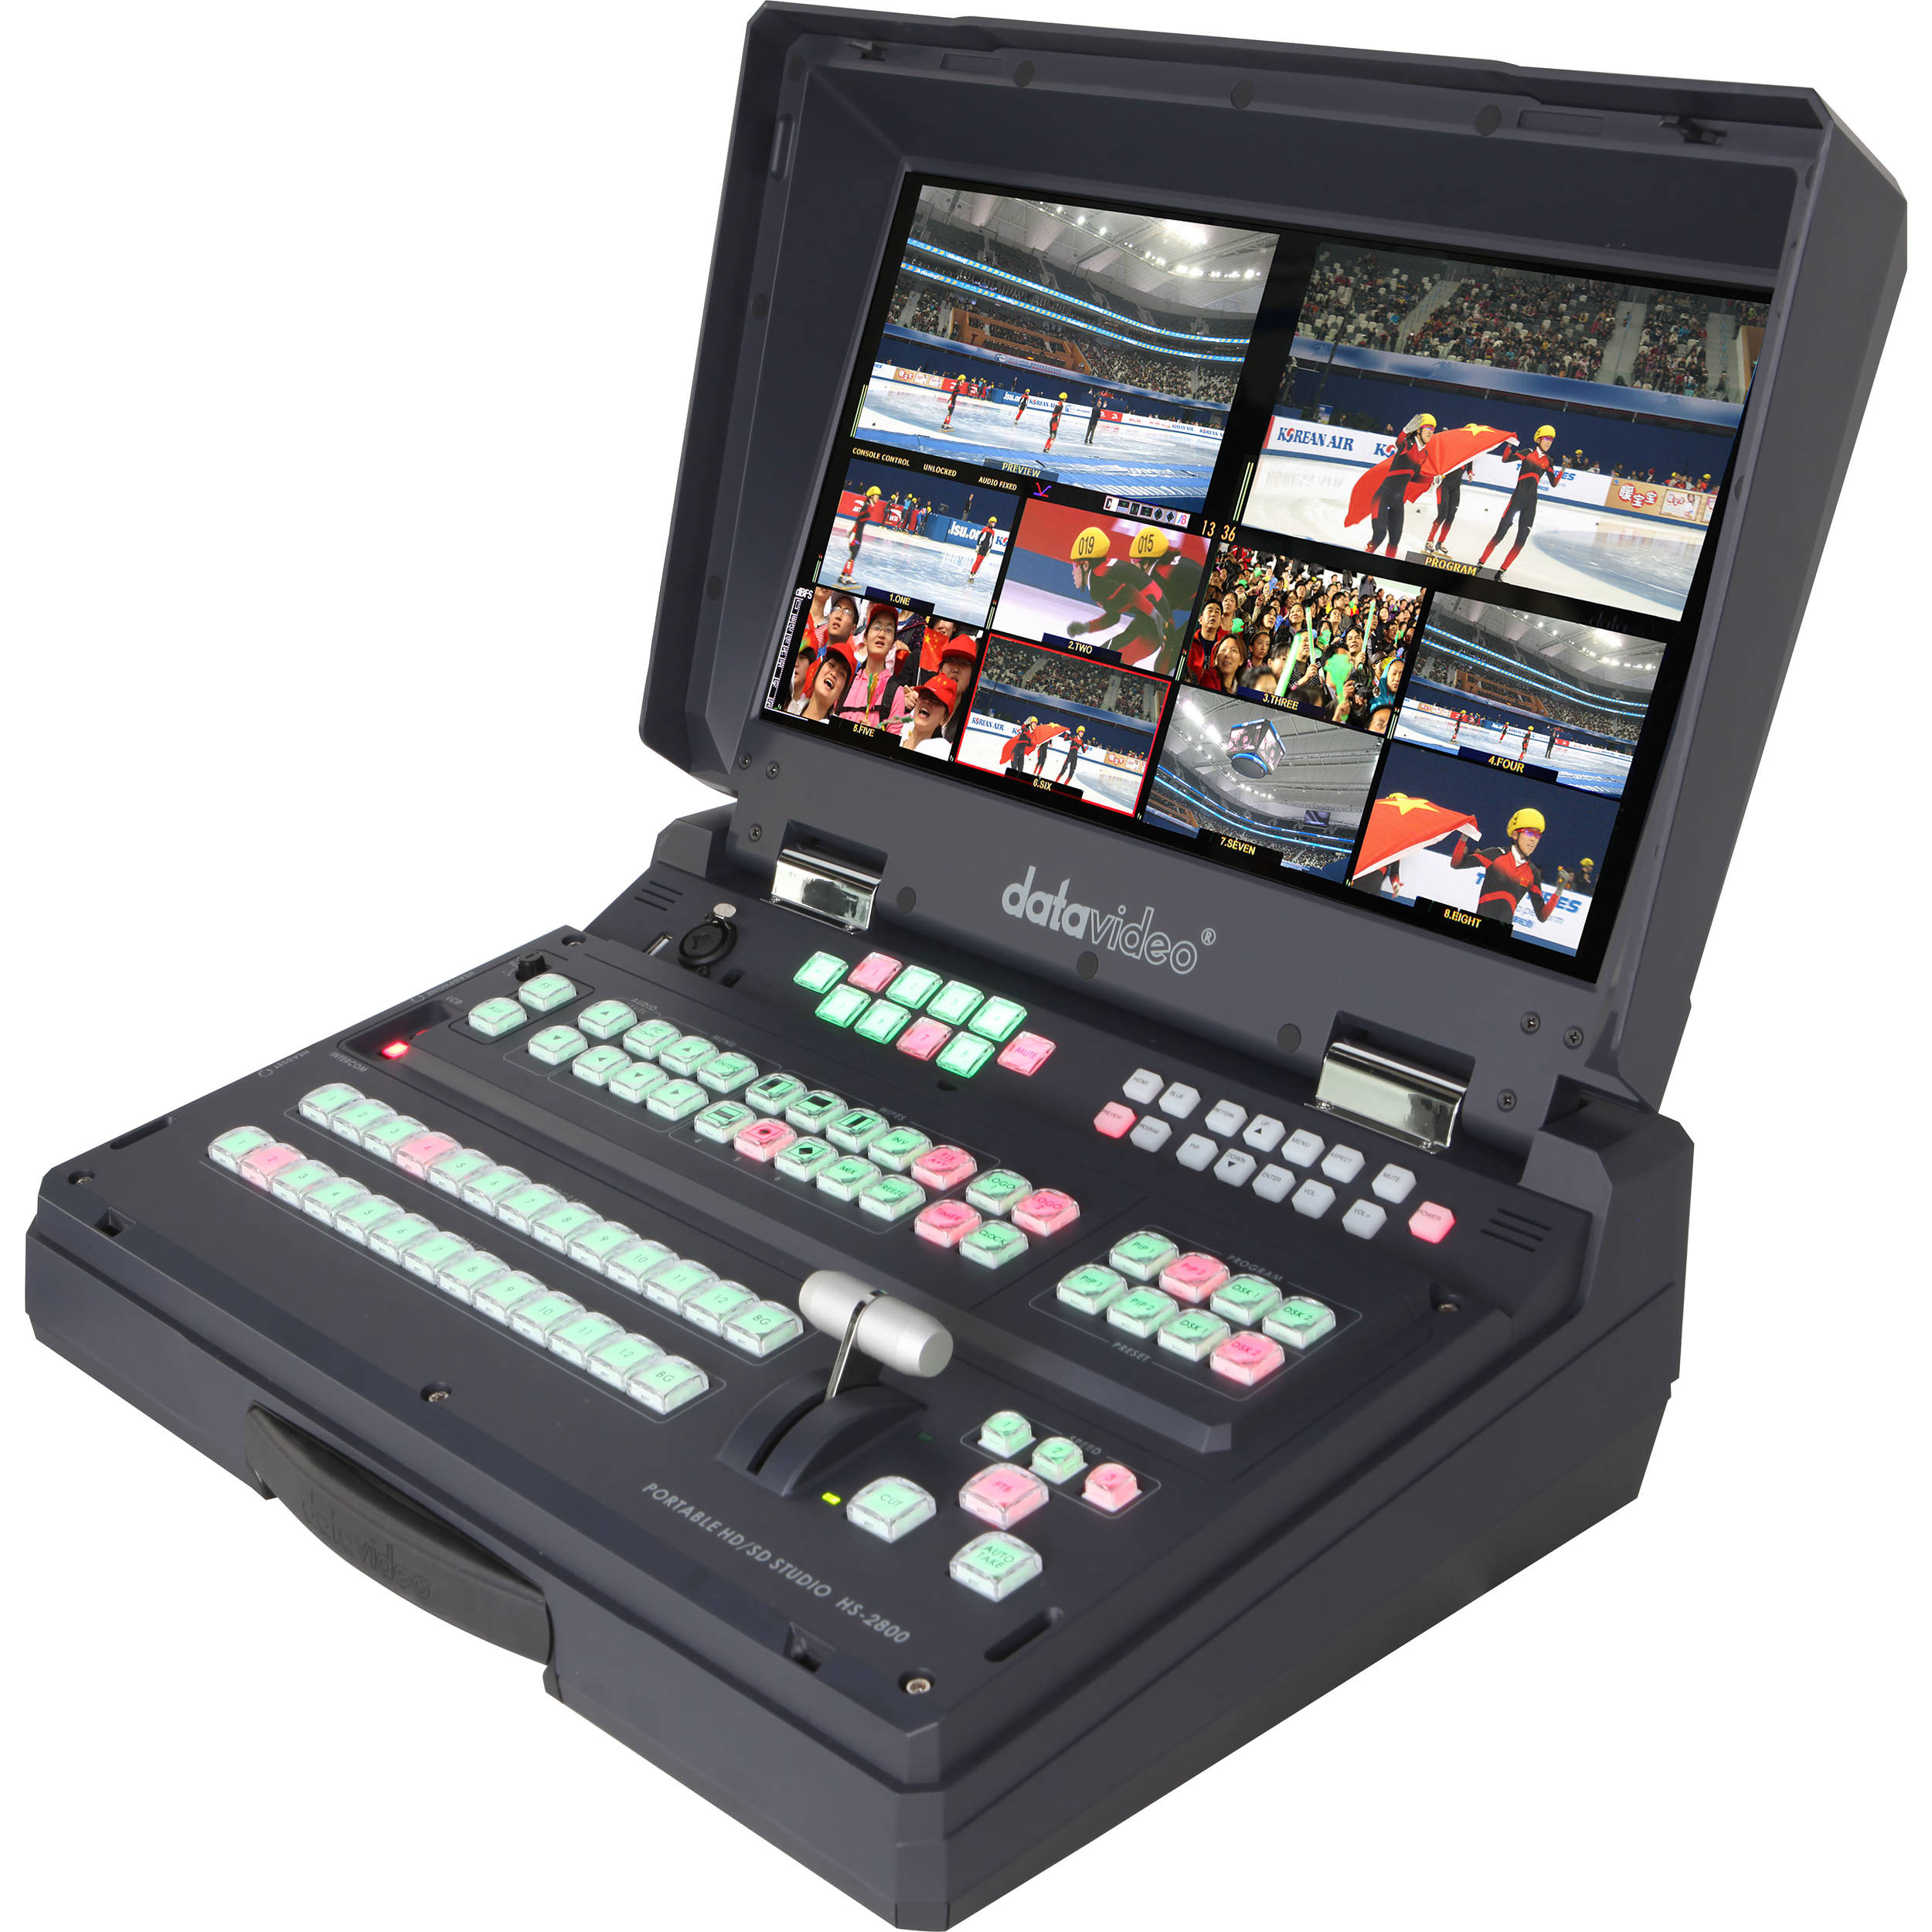 Datavideo Hs 2800 Hand Carried Hd Sd Mobile Studio Hs 2800 12